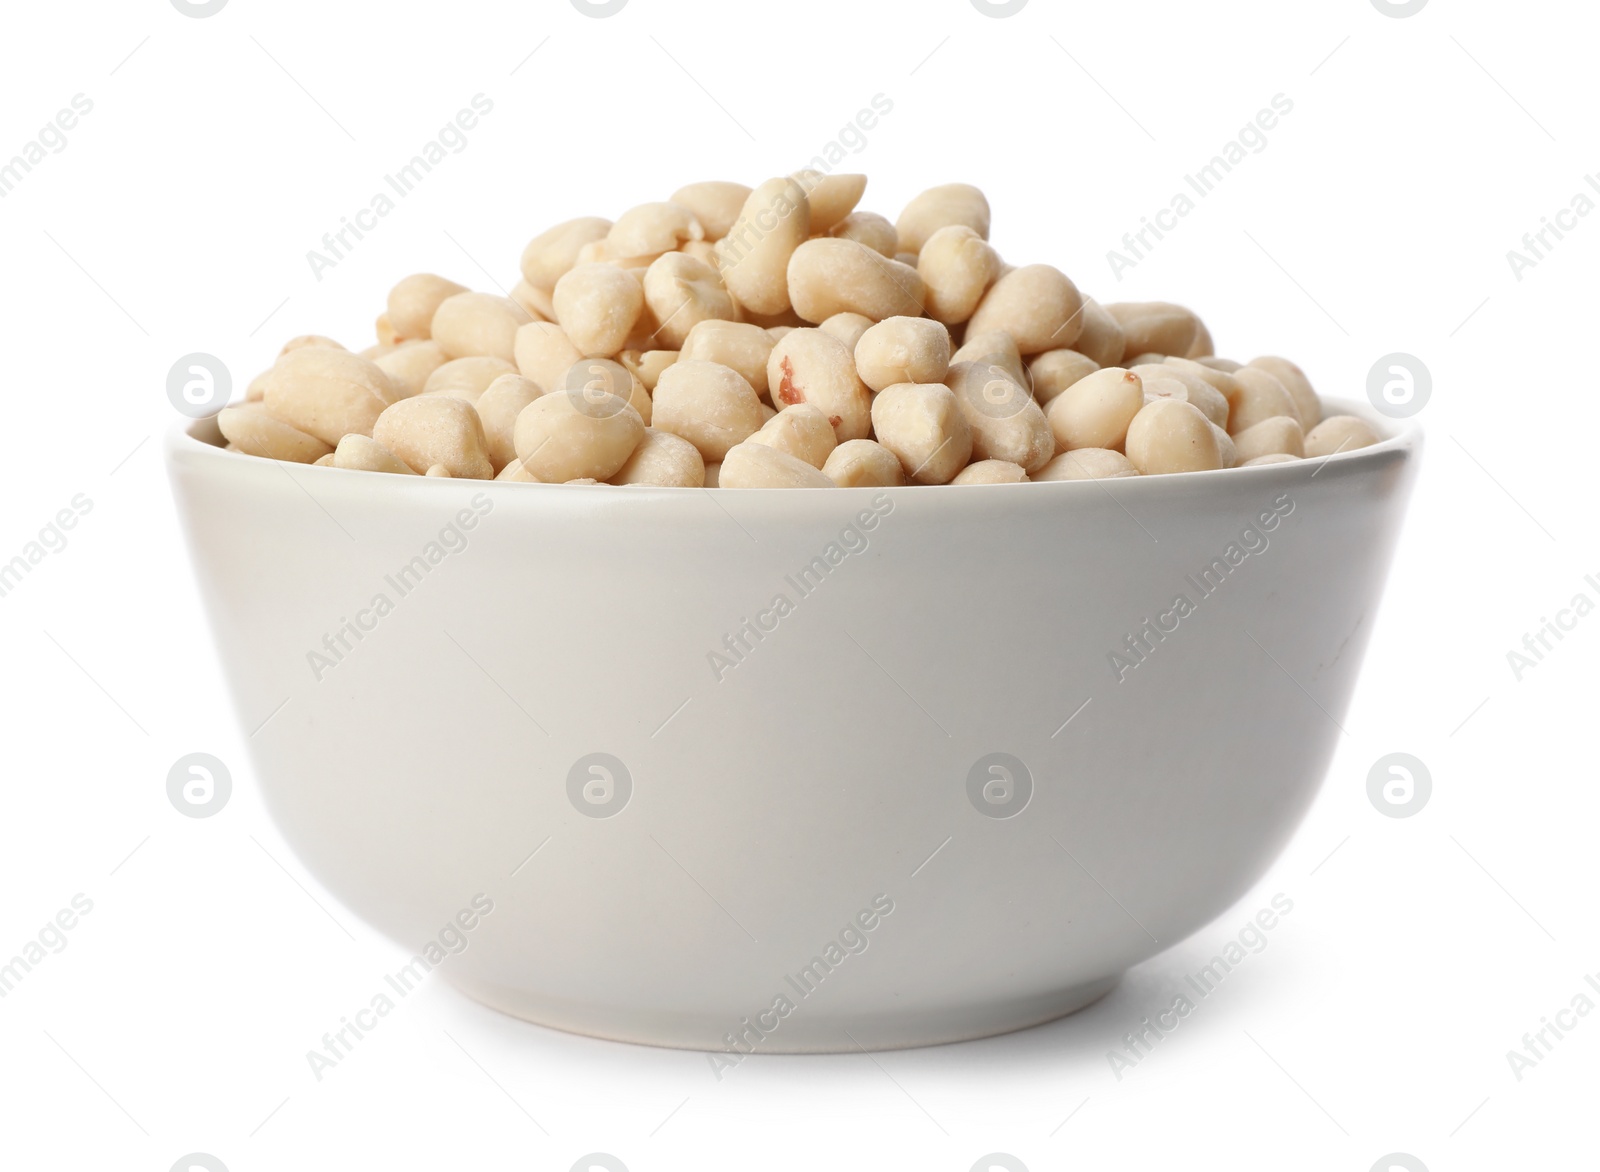 Photo of Shelled peanuts in bowl on white background